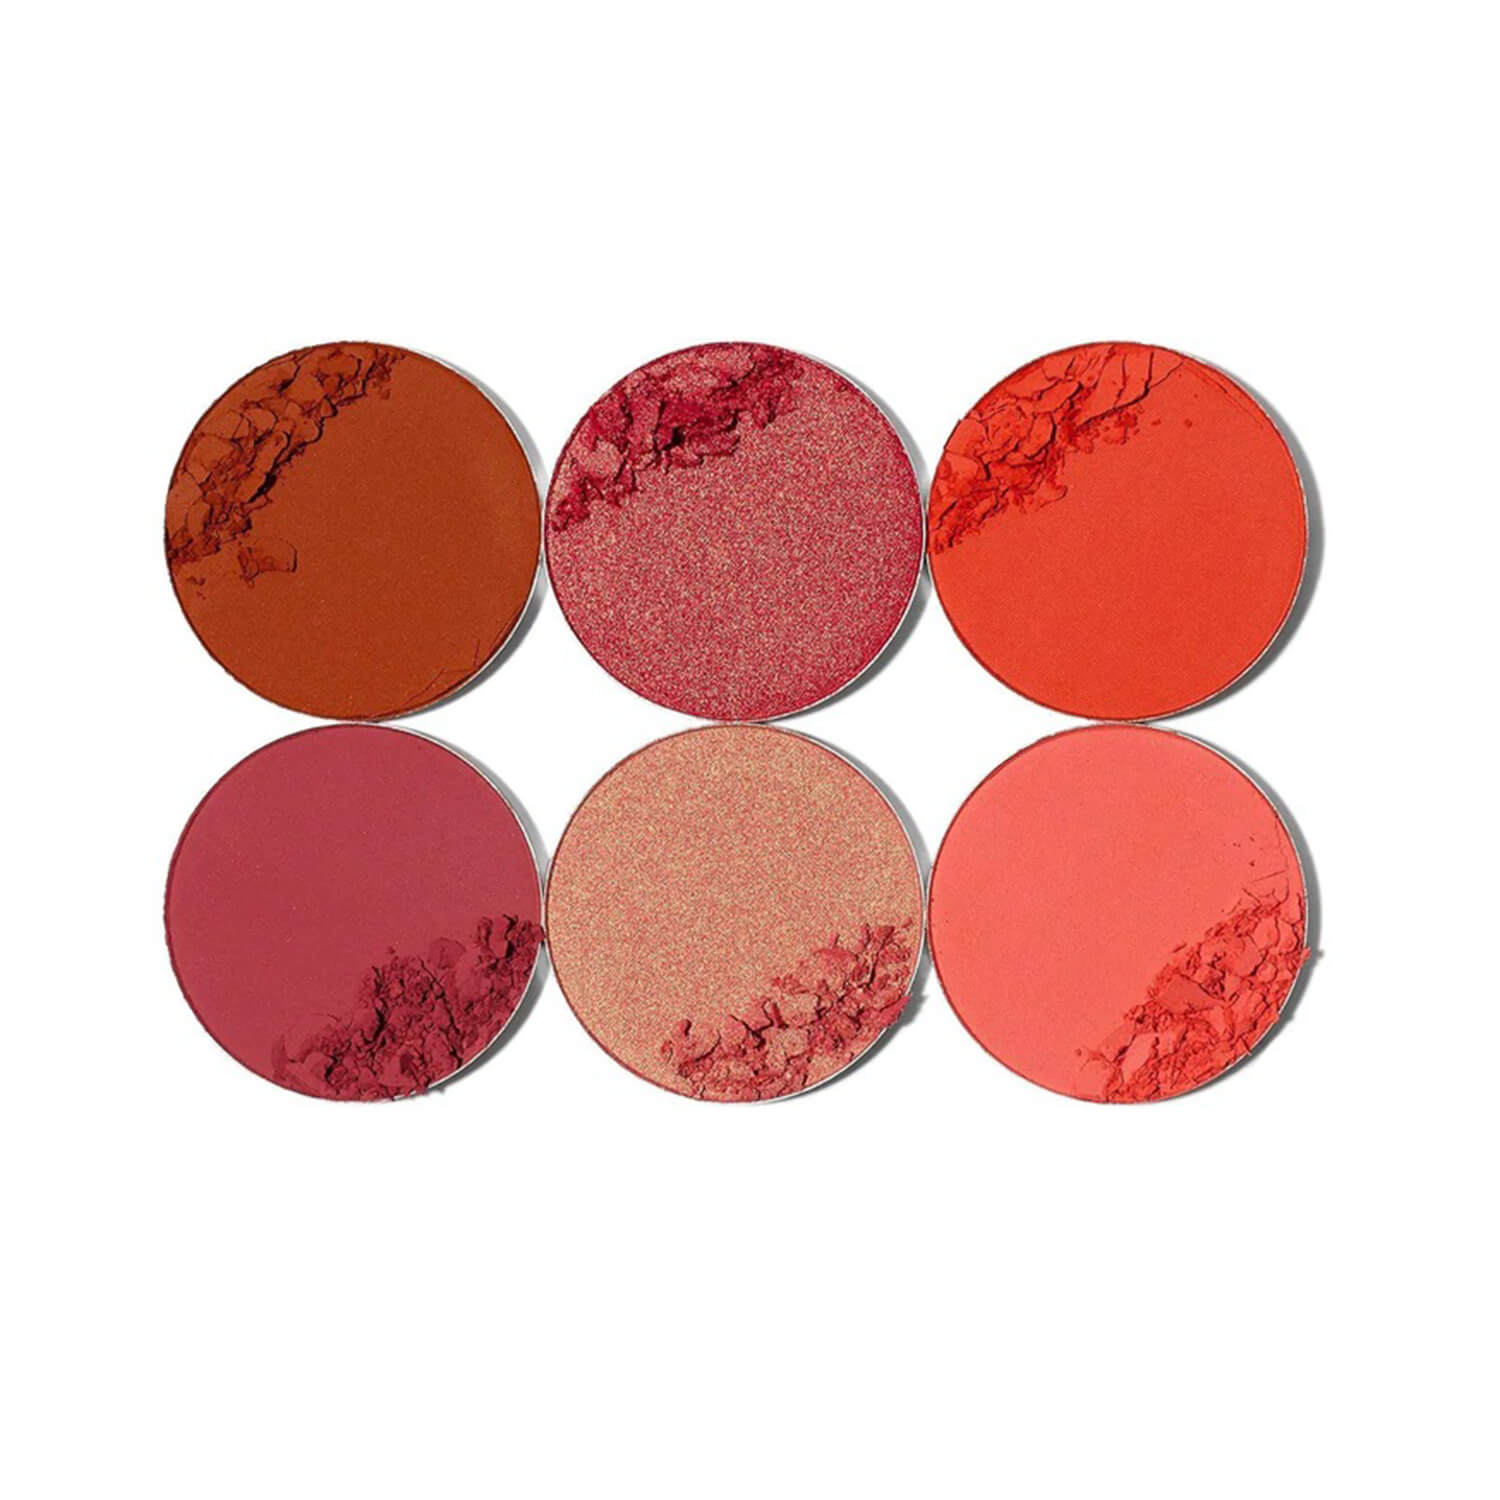 Juvia's The Saharan Blush Palette shades of Volume II available at heygirl.pk for delivery in Pakistan